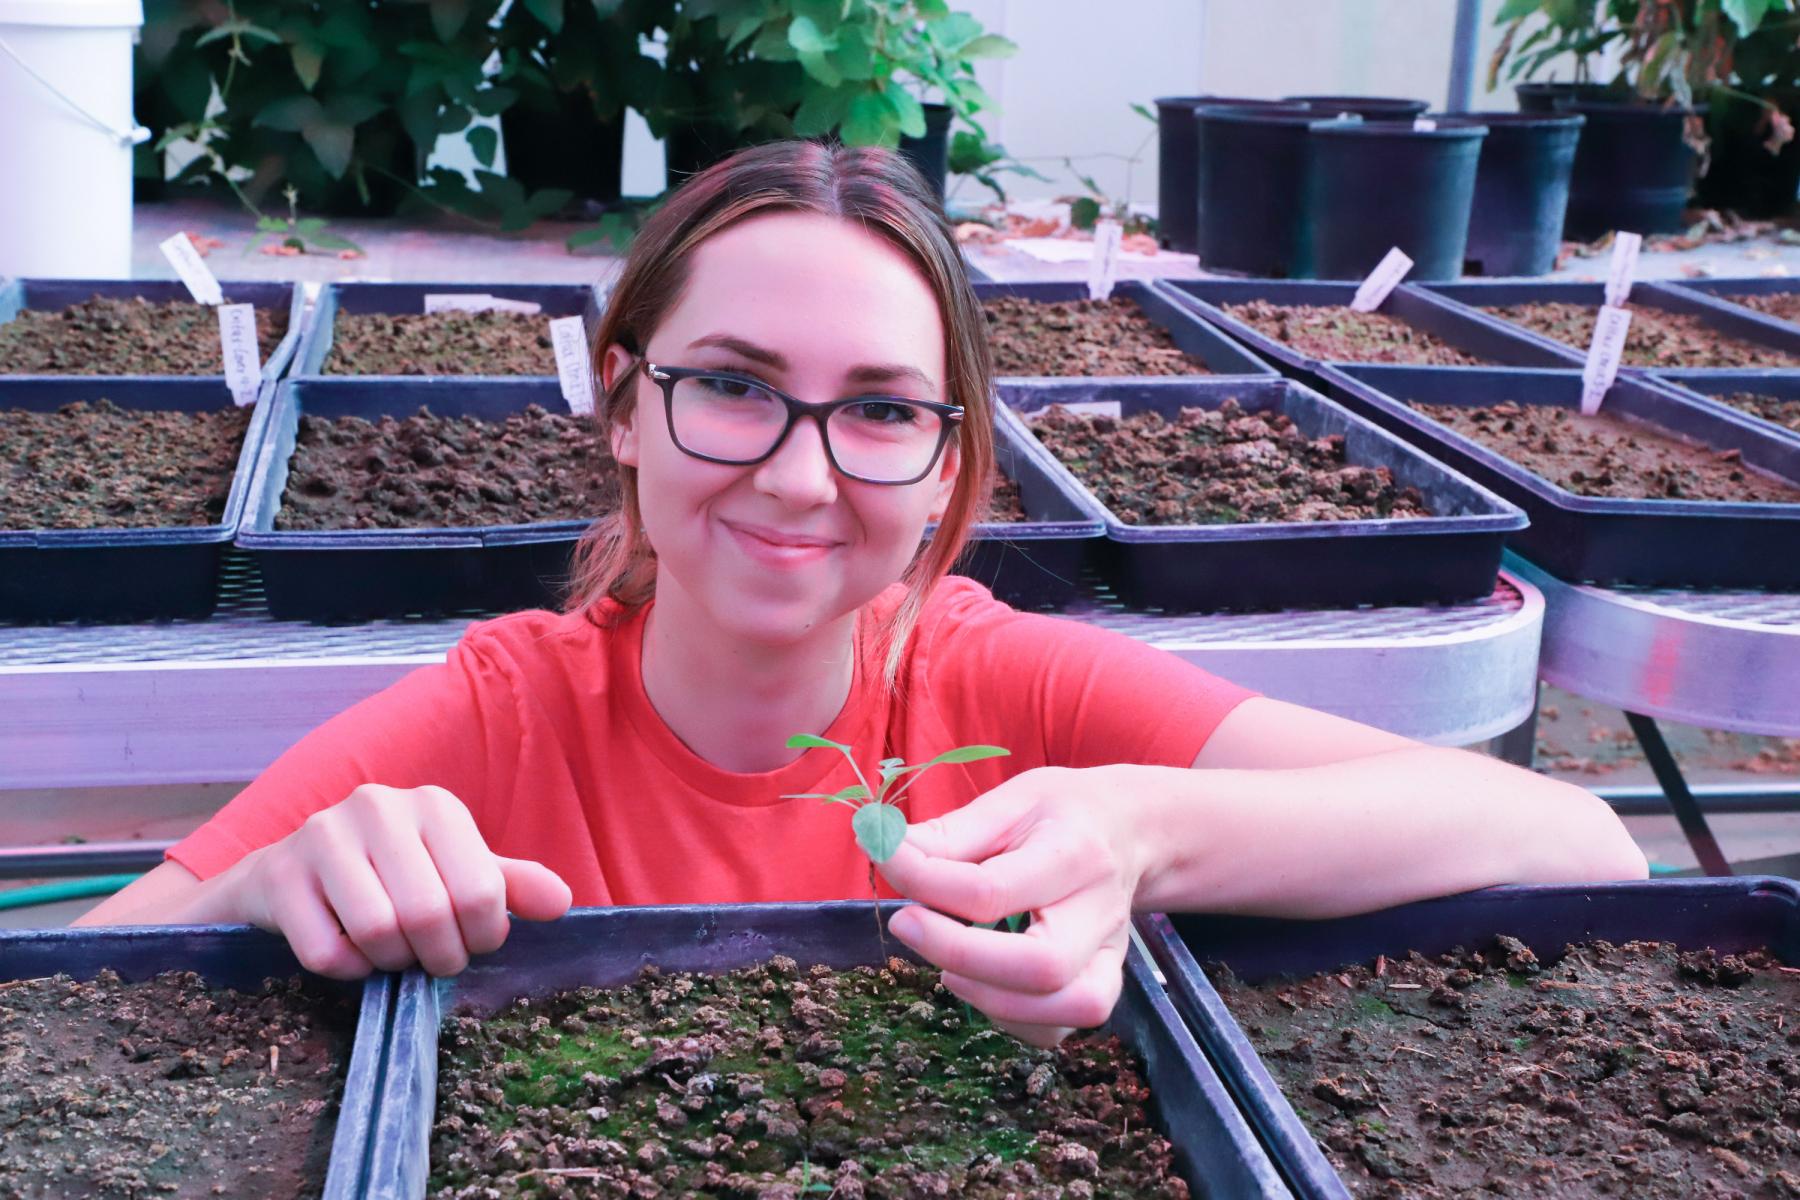 Elizabeth Oys, Department of Agronomy and Horticulture master’s student, works in an East Campus greenhouse characterizing and quantifying weed seeds present in soil samples collected from sites across Nebraska that have grown cover crops.